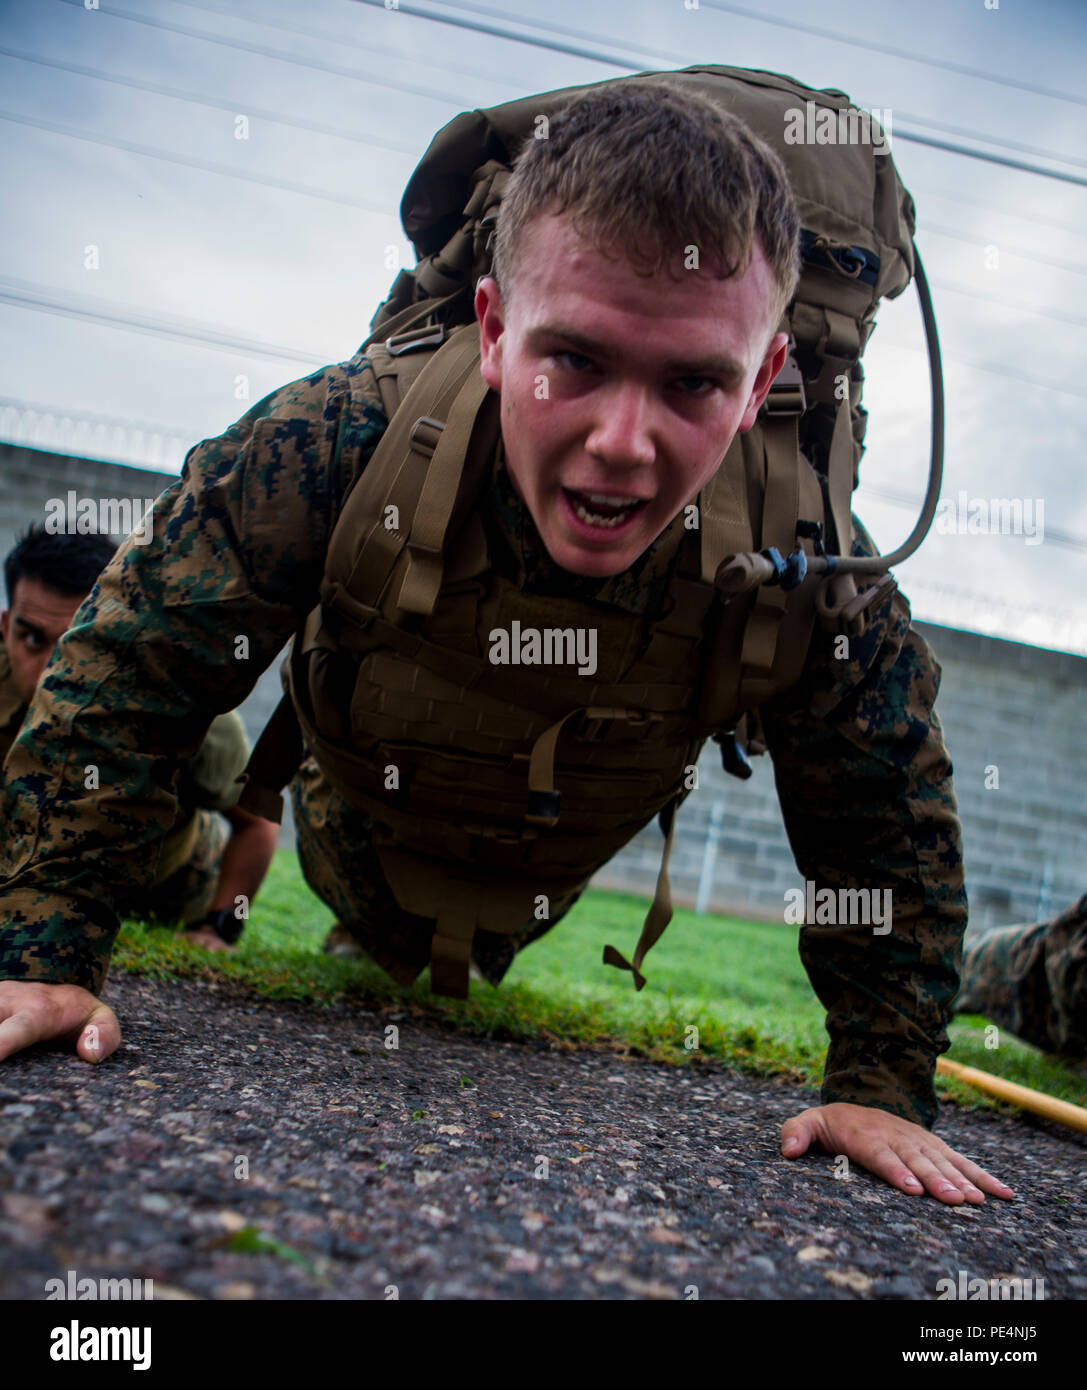 U.S. Marine Corps Cpl. Brendan Betz, an aircraft mechanic and Langhorne, Pa., native, with Special Purpose Marine Air-Ground Task Force-Southern Command performs push-ups while participating in a five-kilometer pack run during a Marine Corps Martial Arts Instructor Course at Soto Cano Air Base, Honduras, Sept. 18, 2015. SPMAGTF-SC is a temporary deployment of Marines and Sailors throughout Honduras, El Salvador, Guatemala, and Belize with a focus on building and maintaining partnership capacity with each country through shared values, challenges, and responsibility. (U.S. Marine Corps Photo by Stock Photo